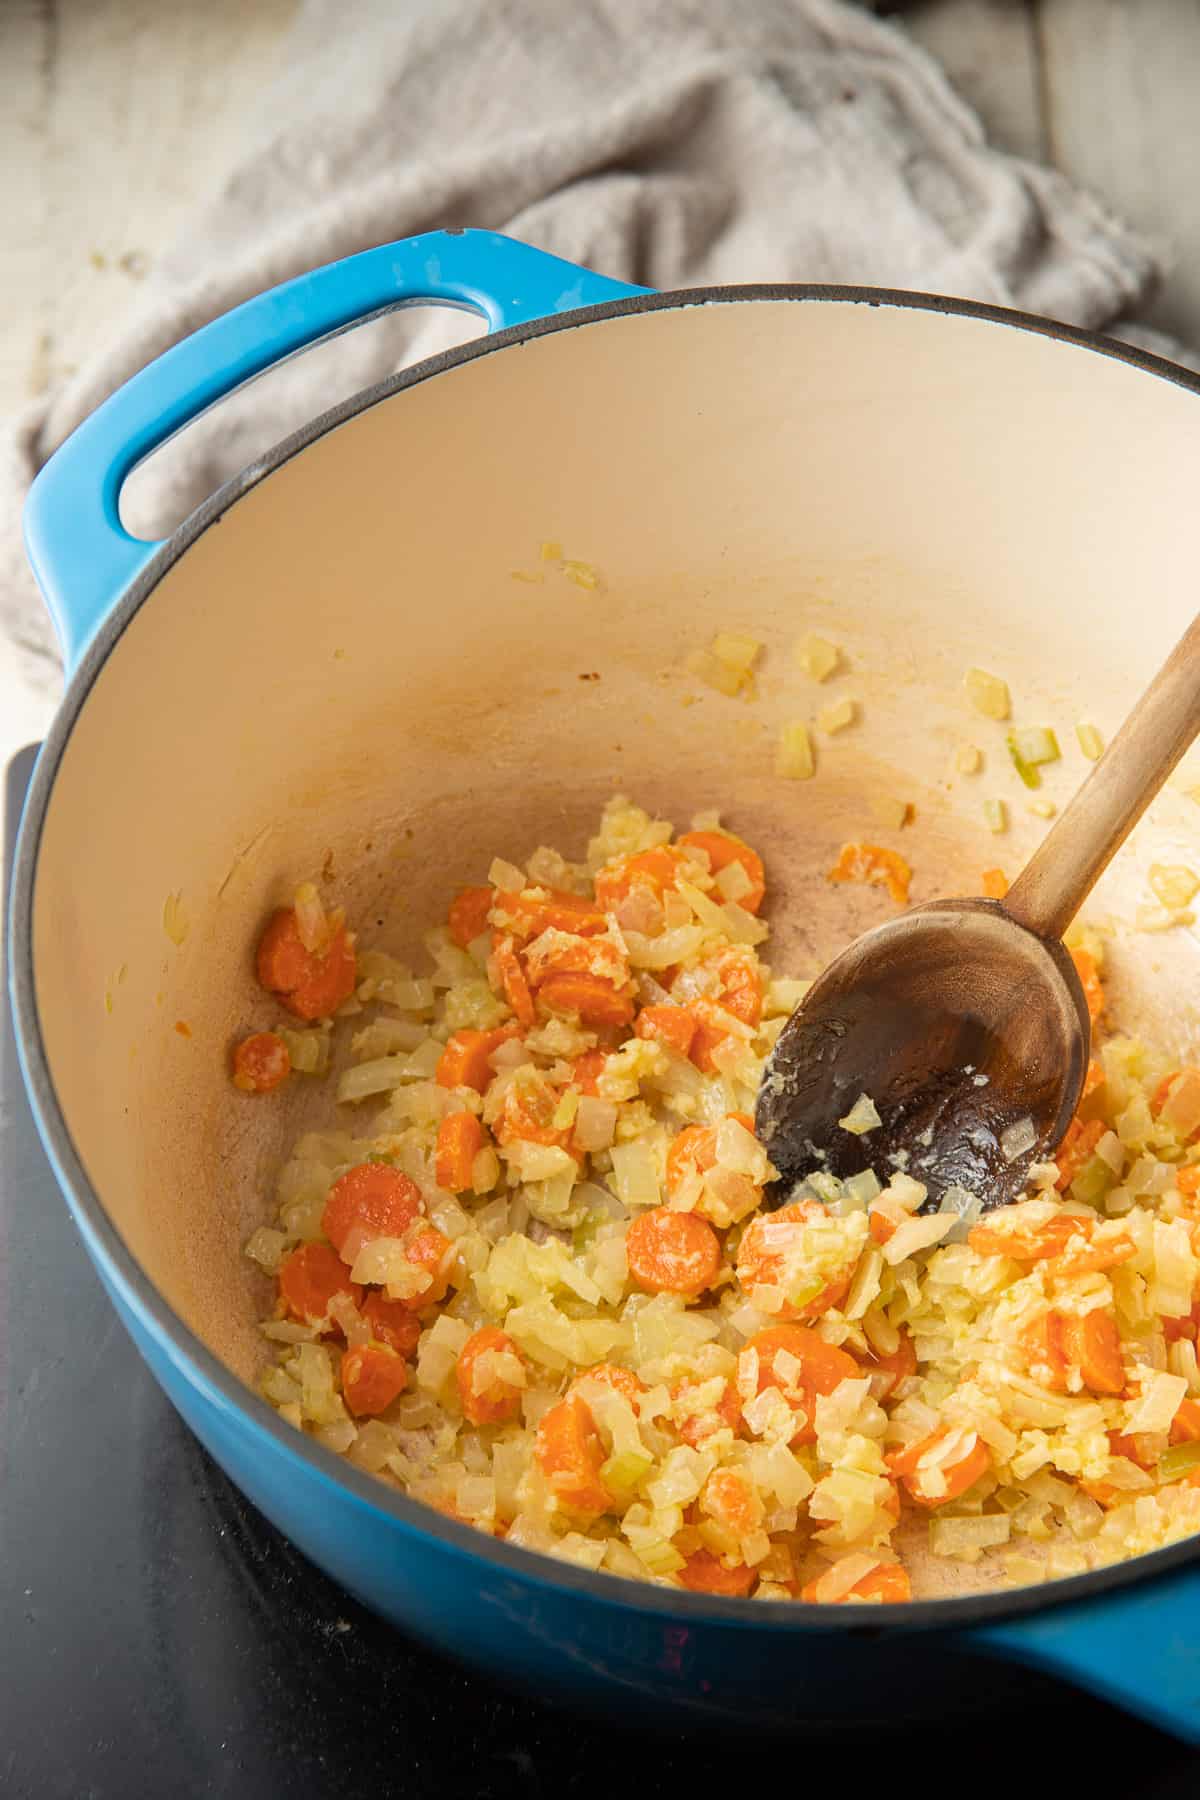 Carrots, onions and flour cooking in a pot.